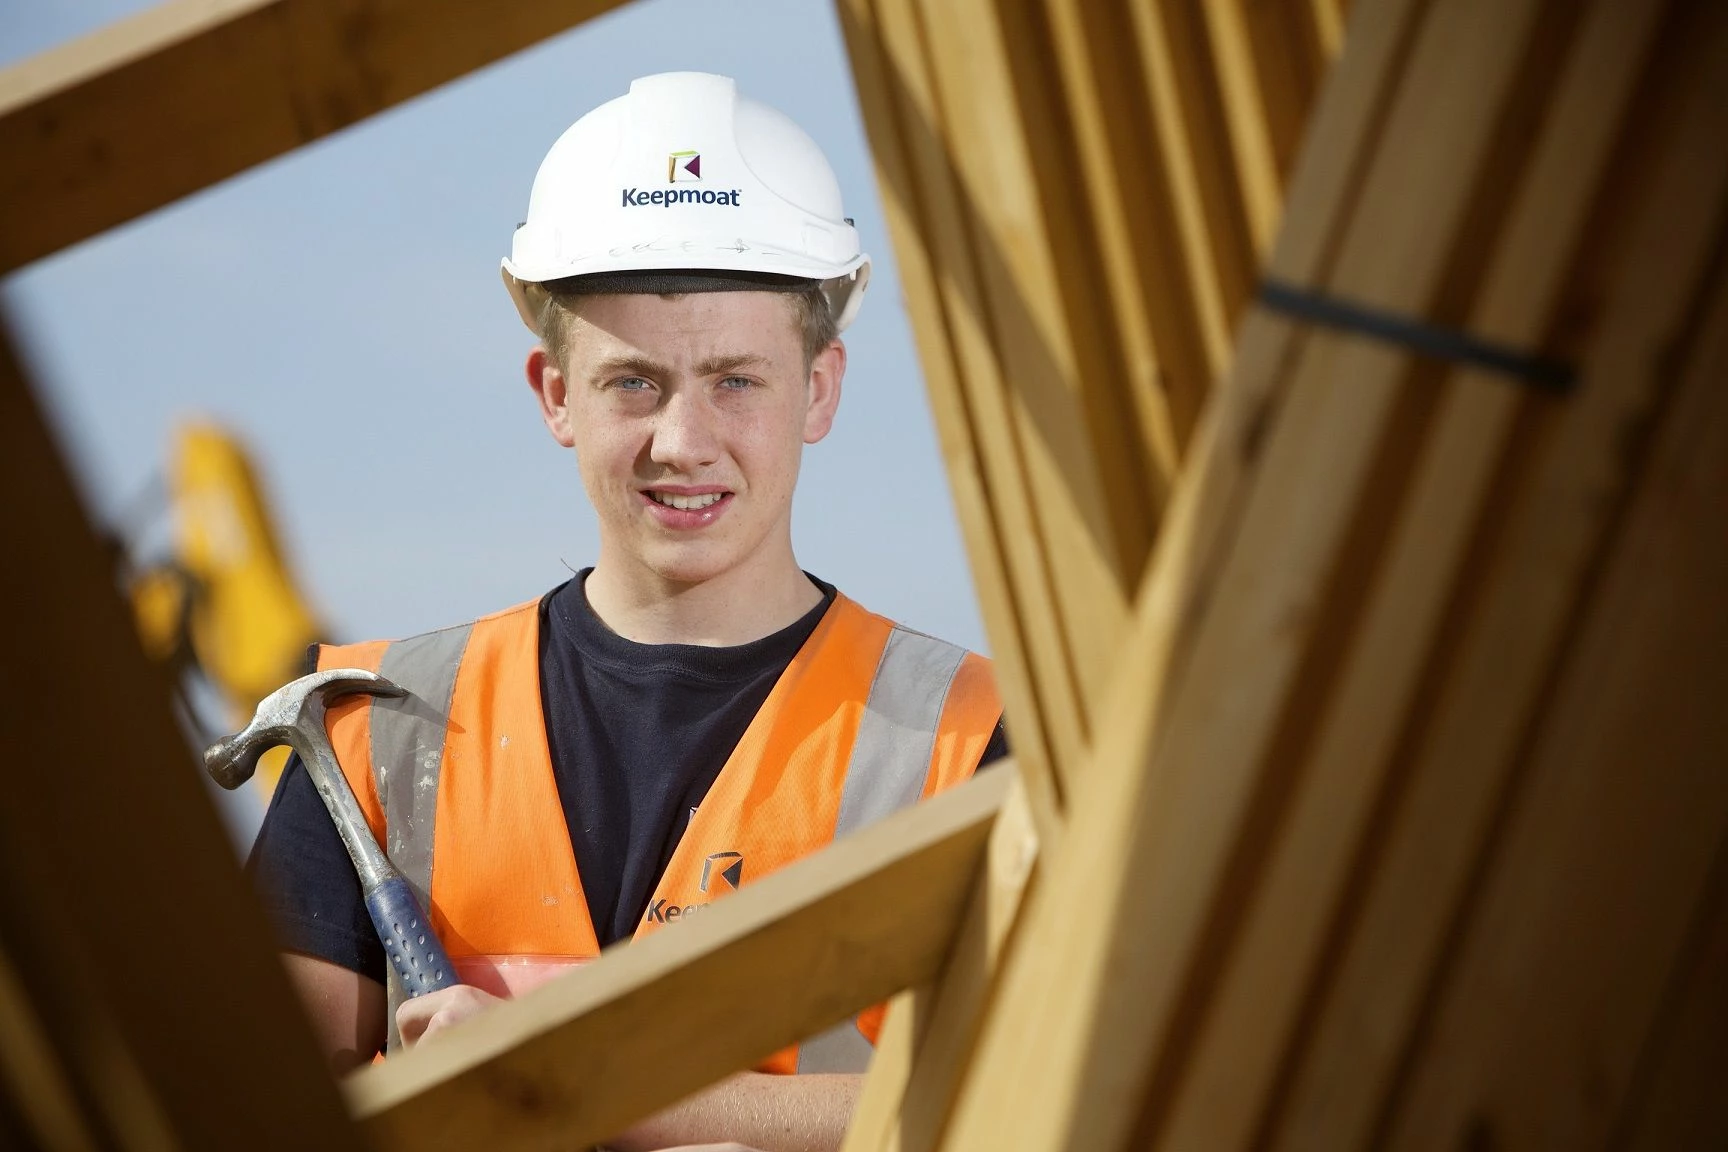 Teenager Reece Pettitt has gained an apprenticeship in joinery and carpentry at Keepmoat